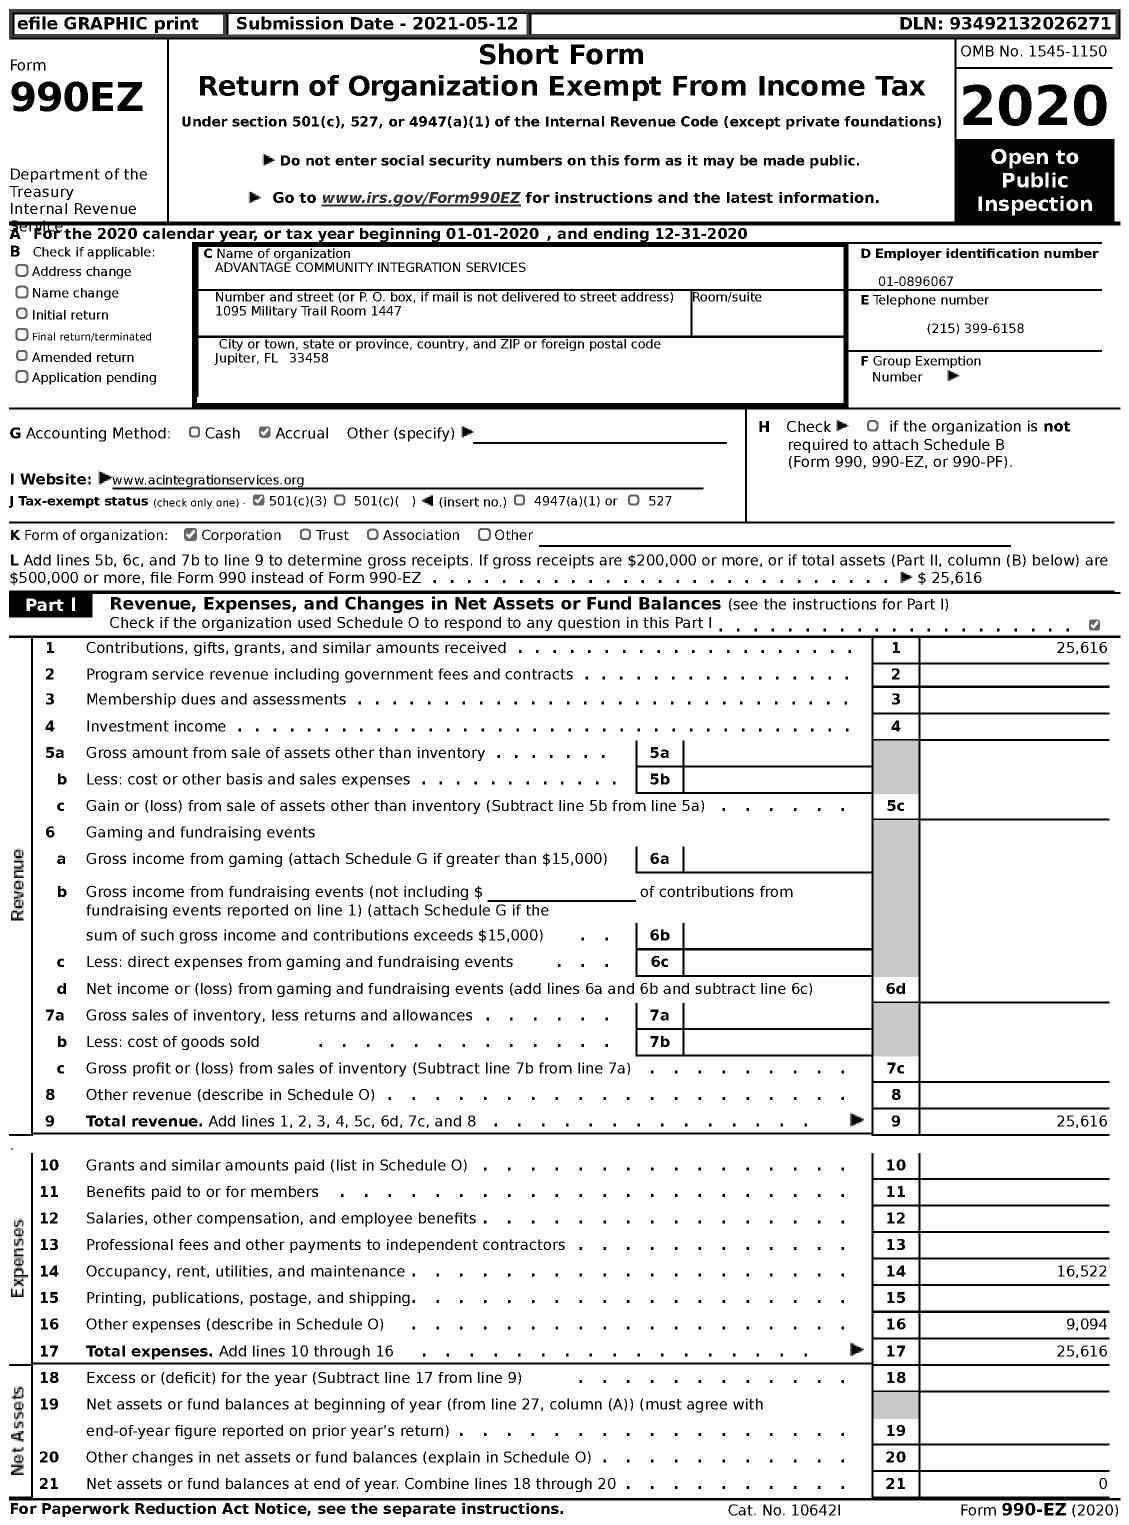 Image of first page of 2020 Form 990EZ for Advantage Community Integration Services